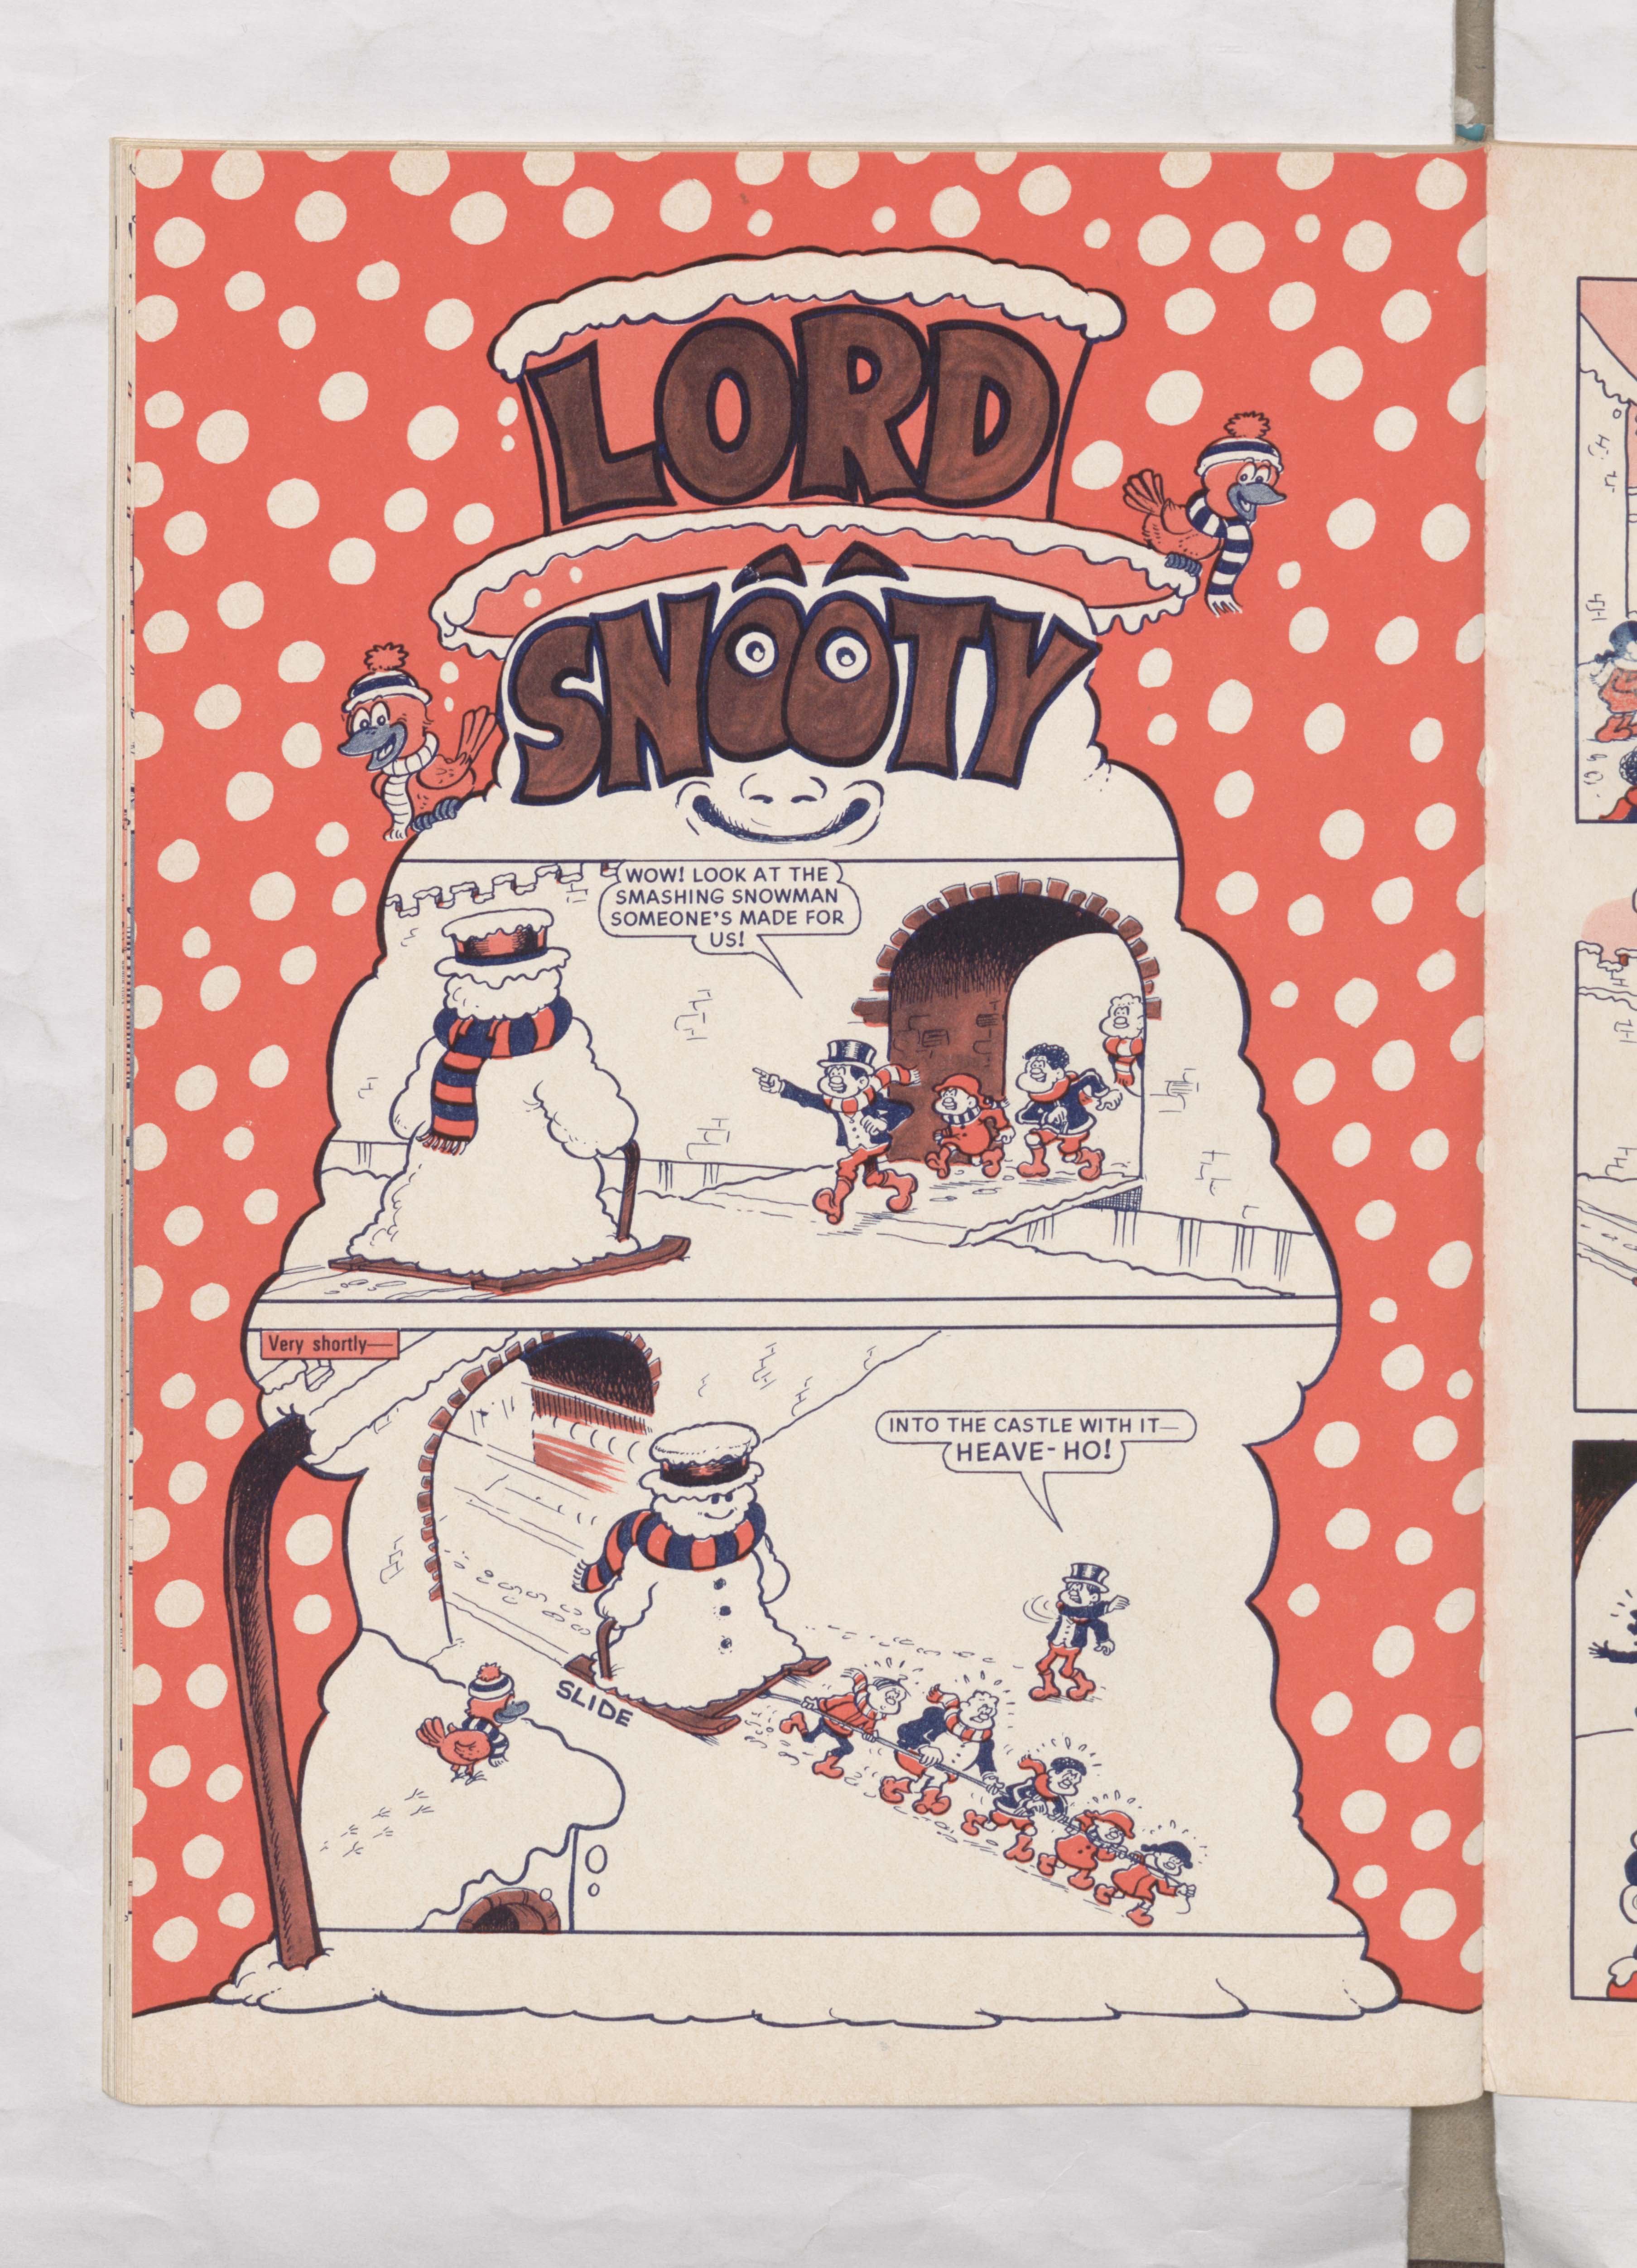 Beano Book 1978 Annual - Lord Snooty's Snowman - Page 1